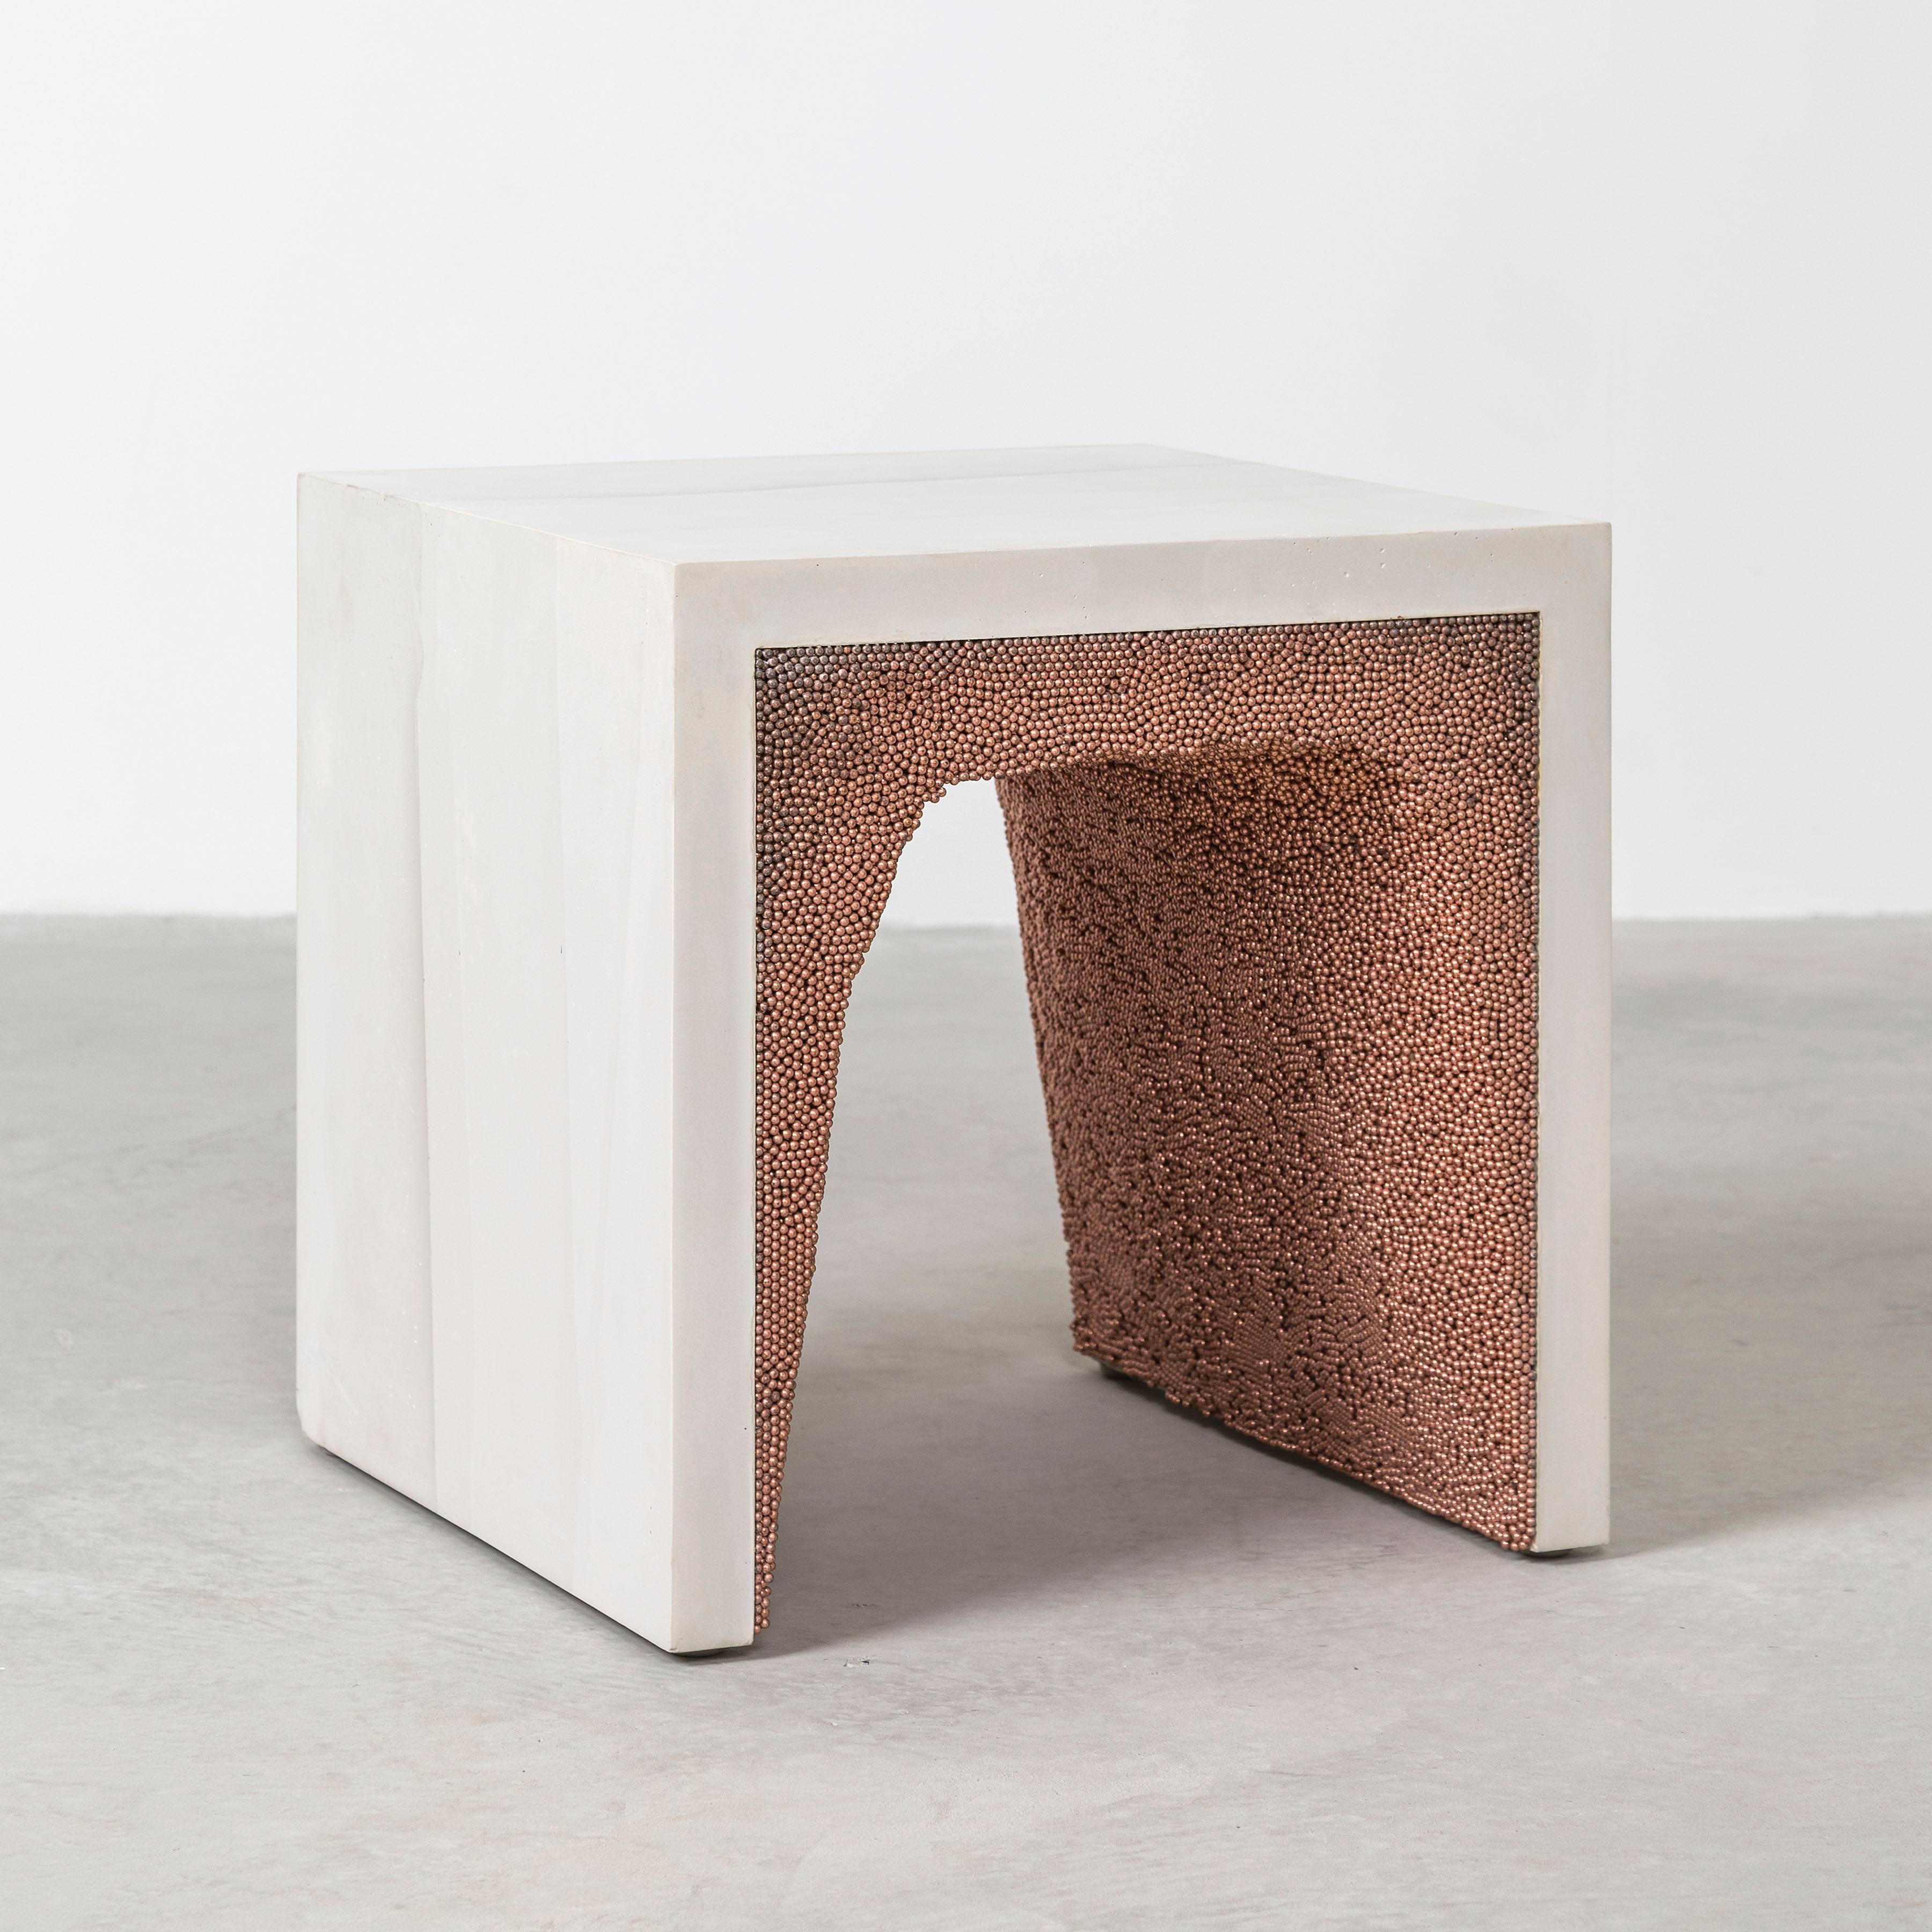 Composed from a combination of materials, the angular side table consists of a hand-dyed cement exterior and a copper BB interior. Packed by hand within the smooth ombre of cement, the granules form an organic texture to contrast the structural